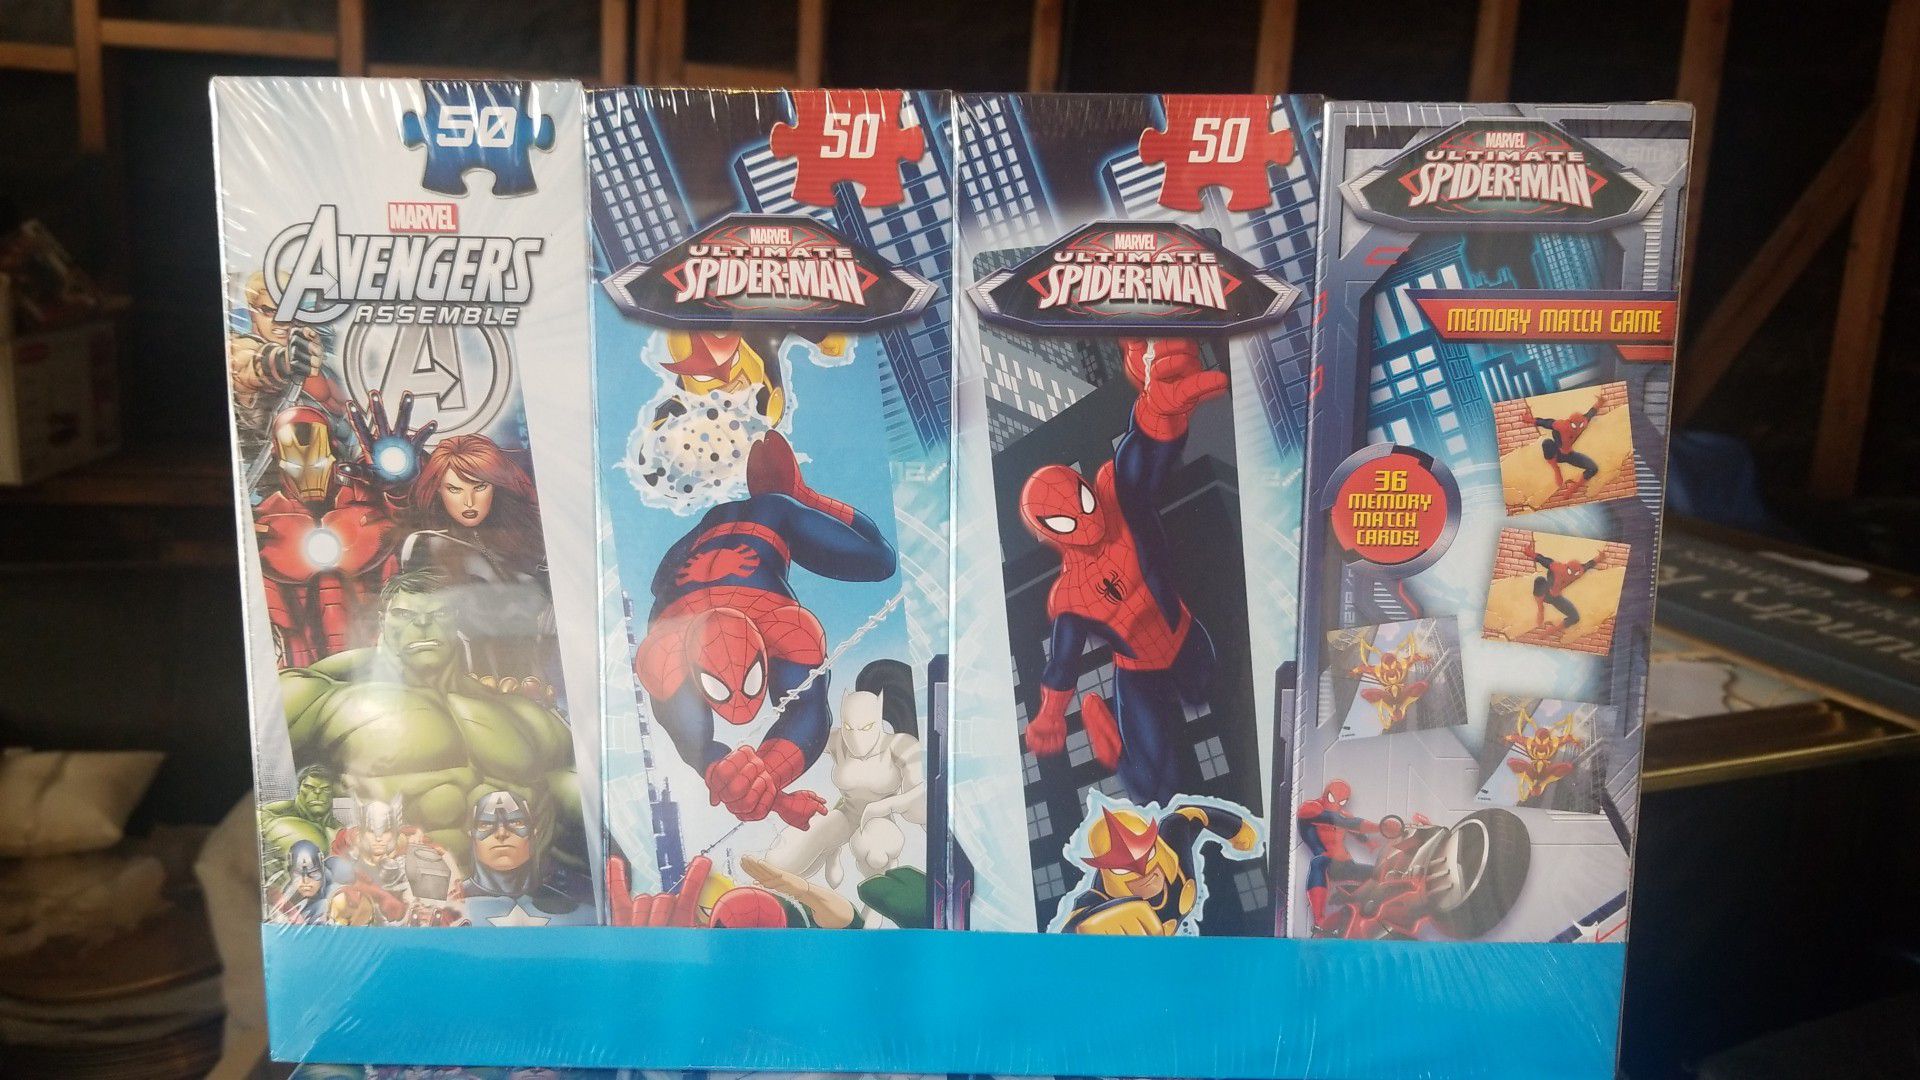 Avengers/spiderman puzzles and match game